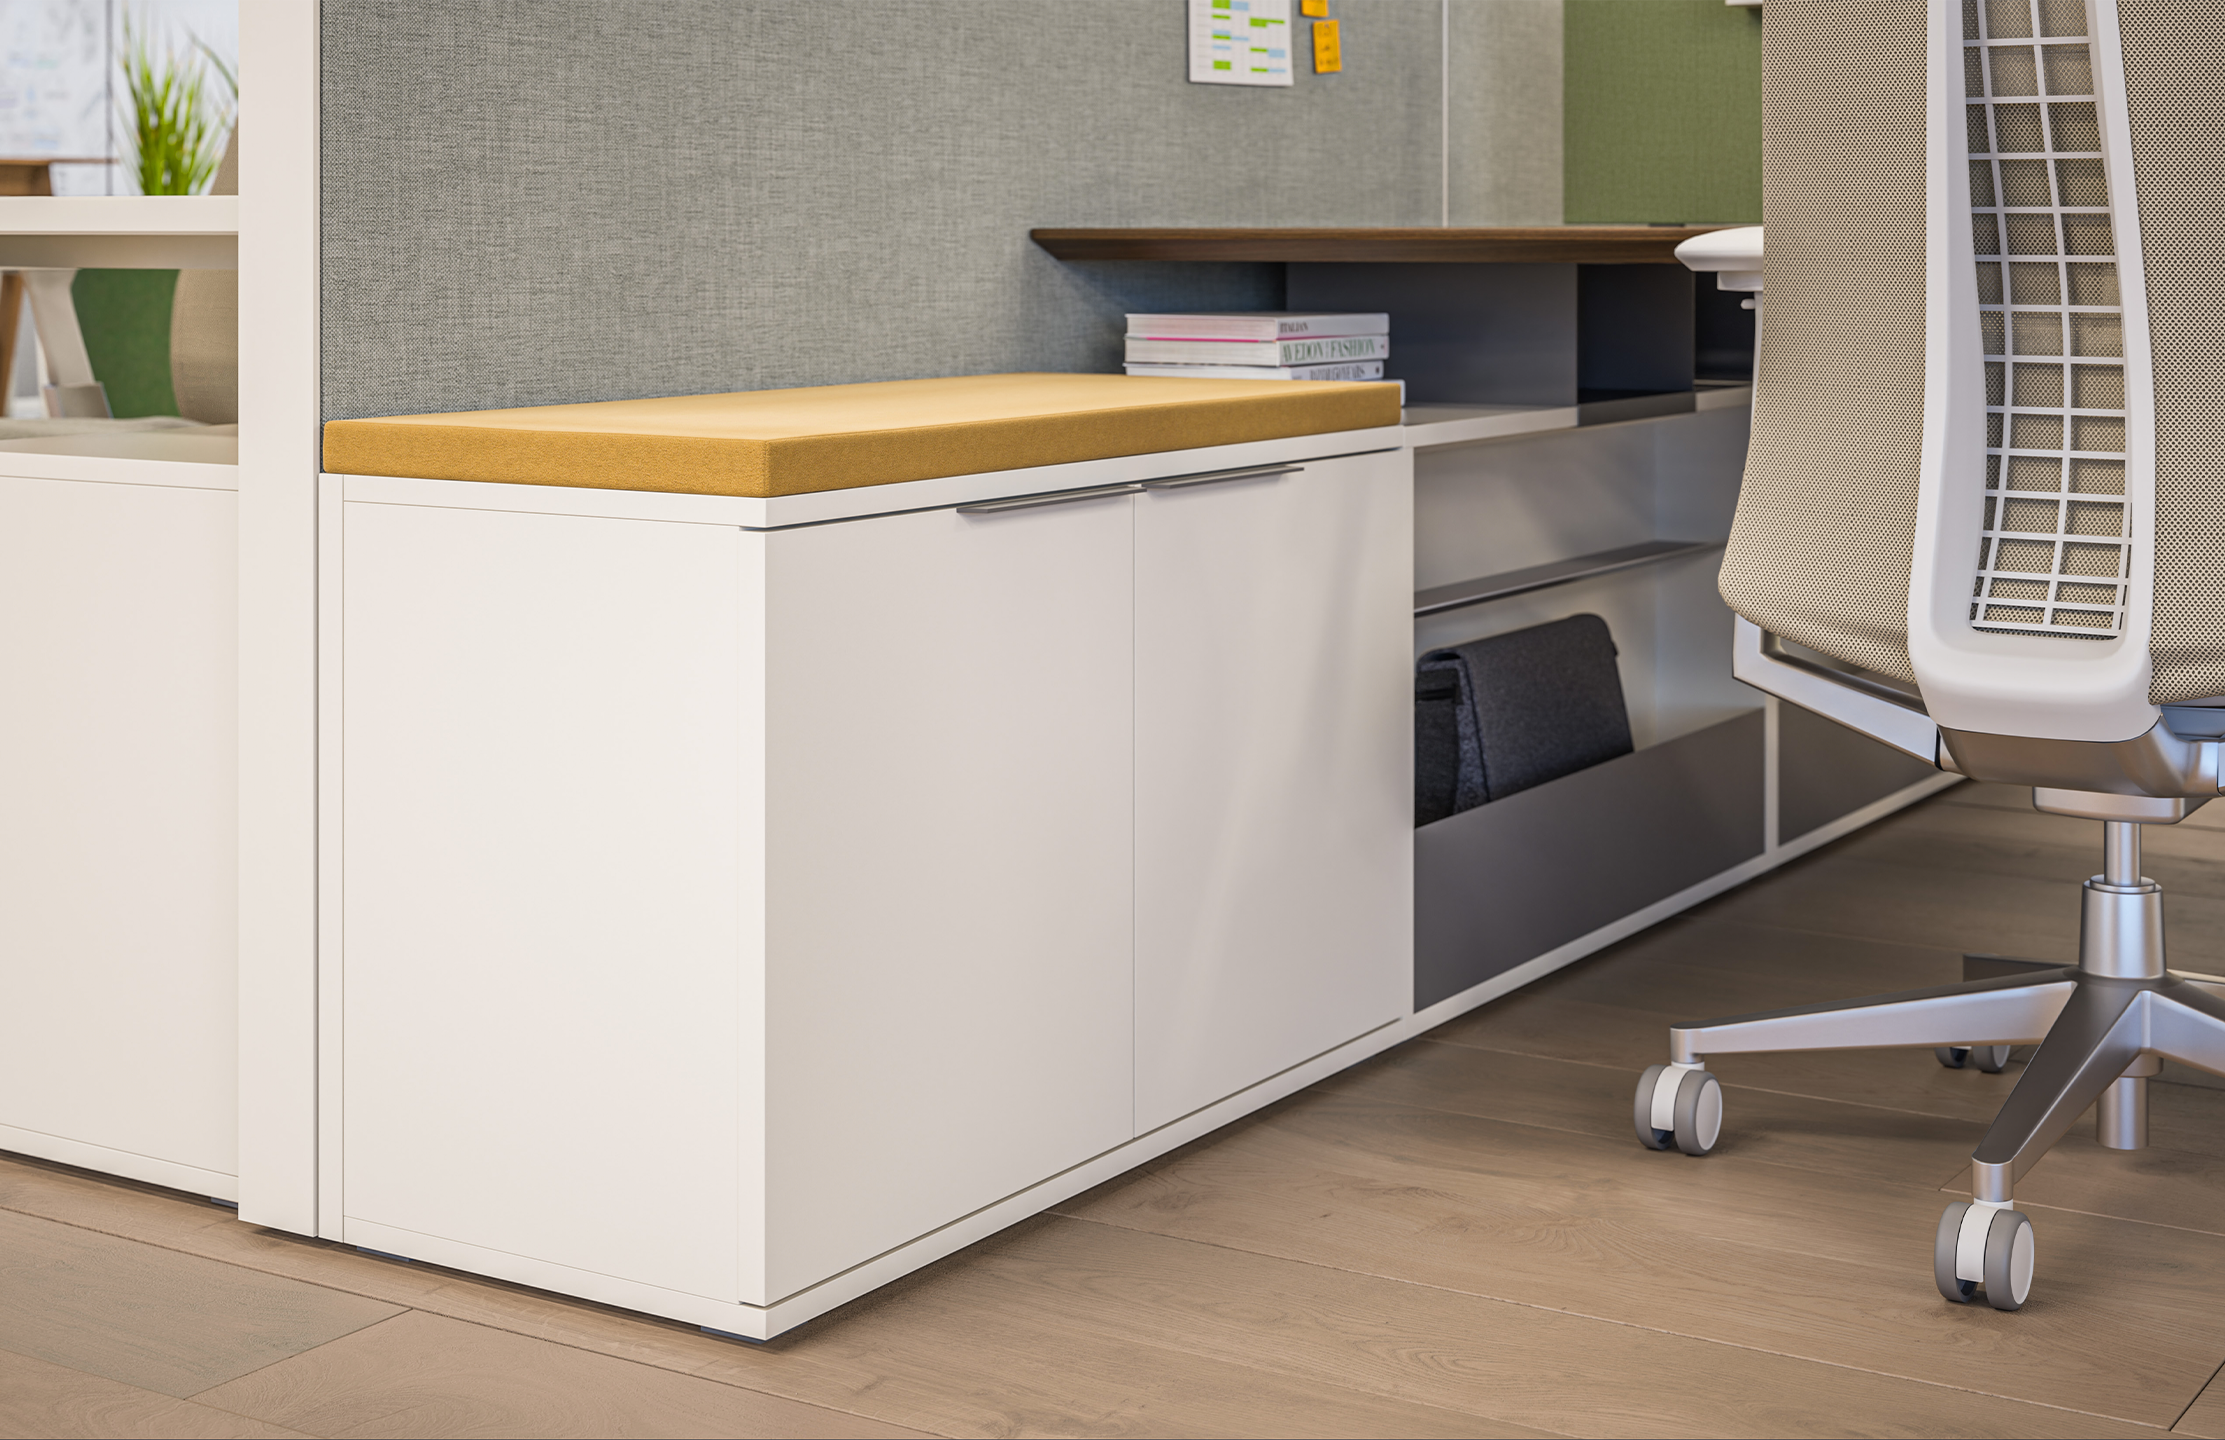 Freestanding low credenza in white finish with cushion